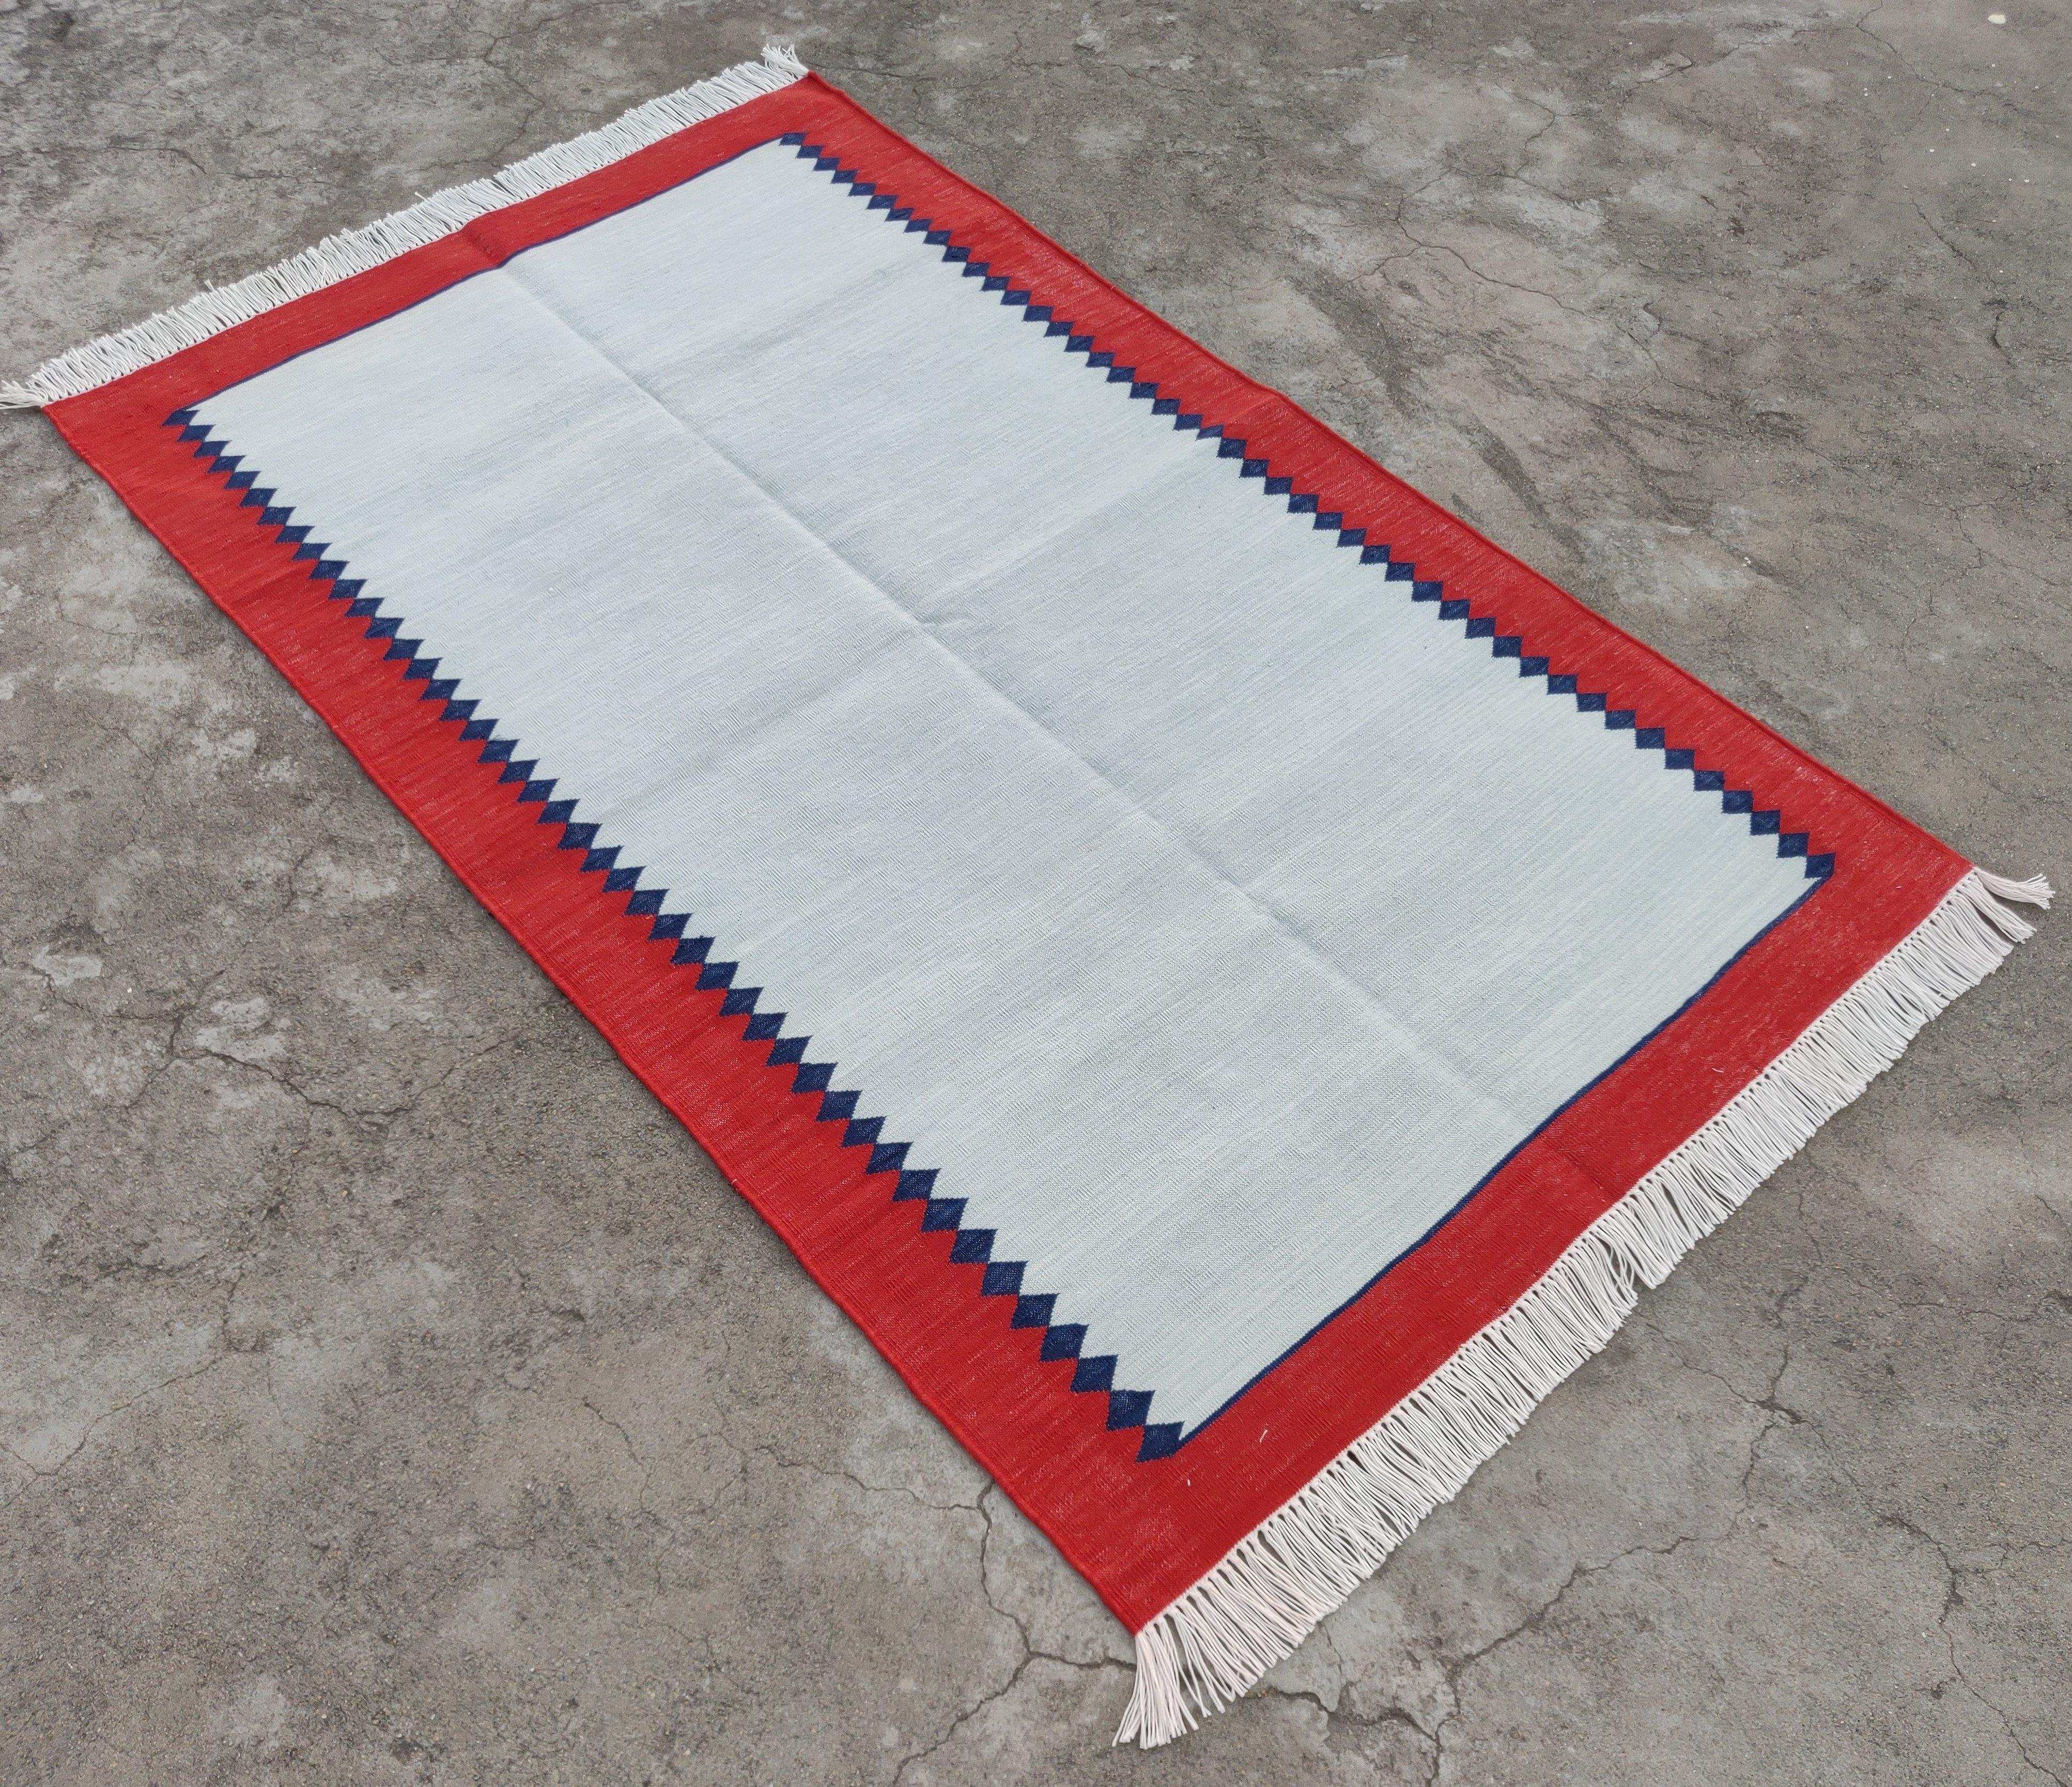 Cotton Vegetable Dyed Sky Blue And Red Zig Zag Striped Indian Dhurrie Rug-3'x5'

These special flat-weave dhurries are hand-woven with 15 ply 100% cotton yarn. Due to the special manufacturing techniques used to create our rugs, the size and color